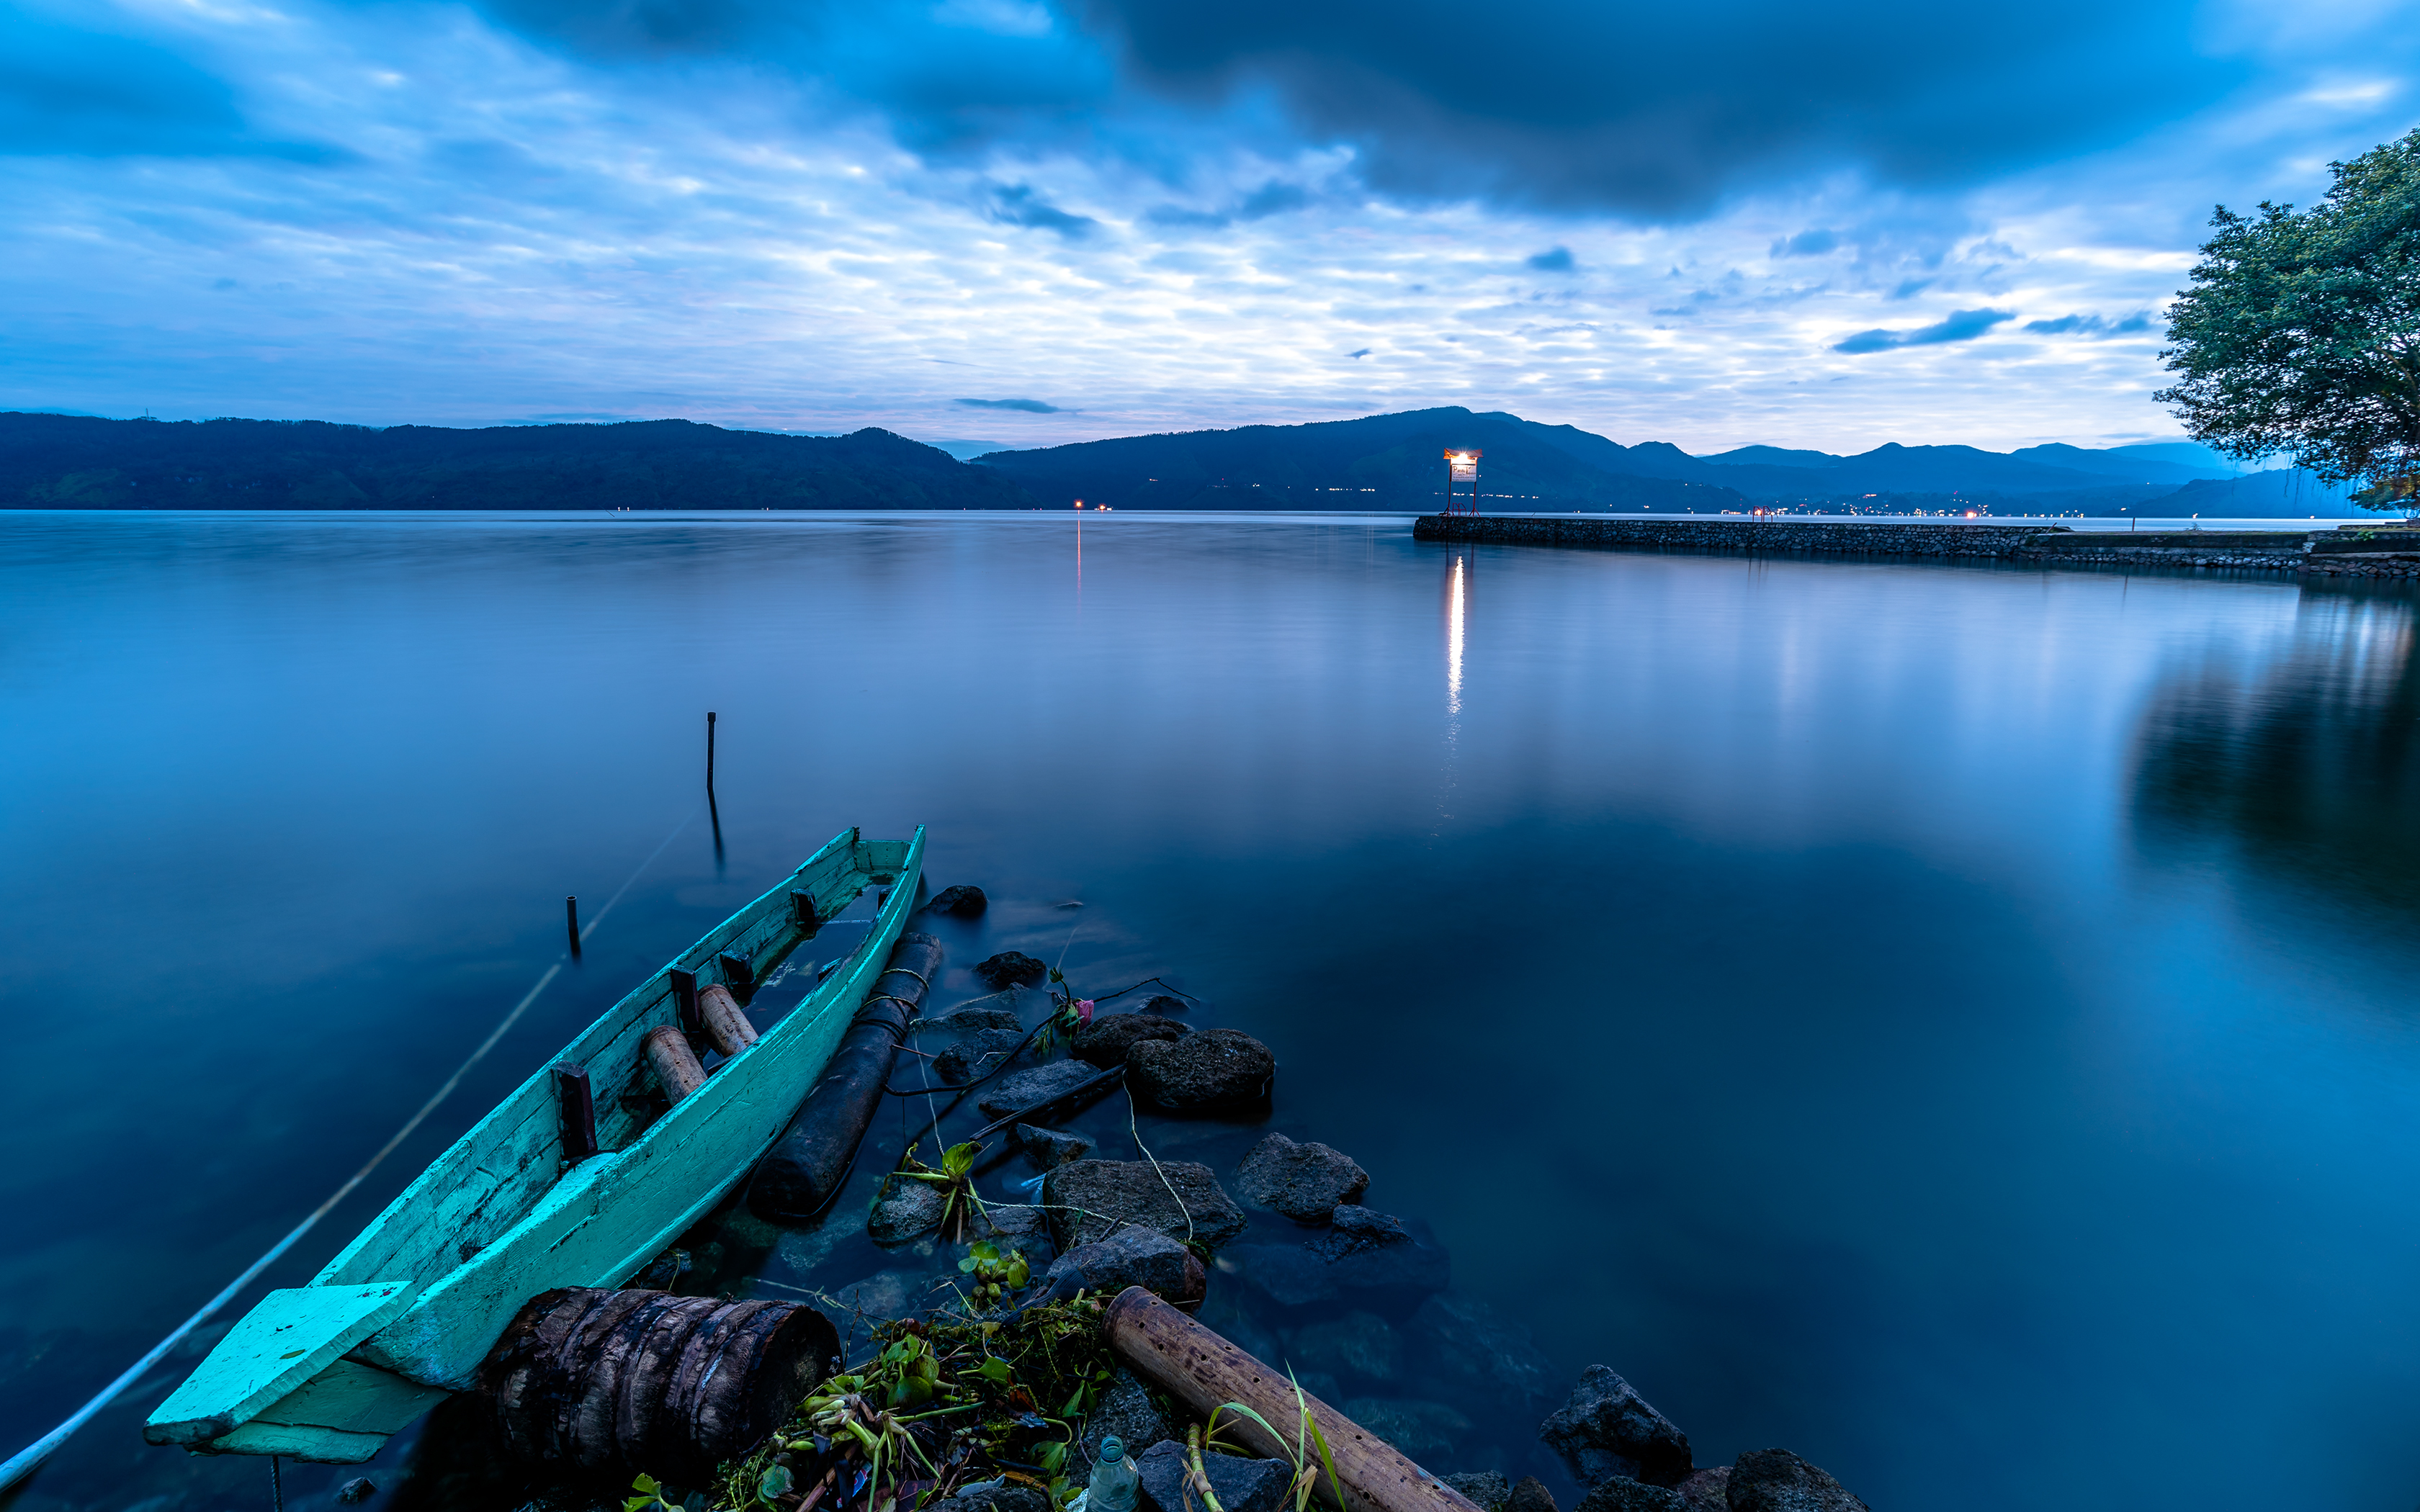 Image Indonesia Lake Toba Occupying The Caldera Of A